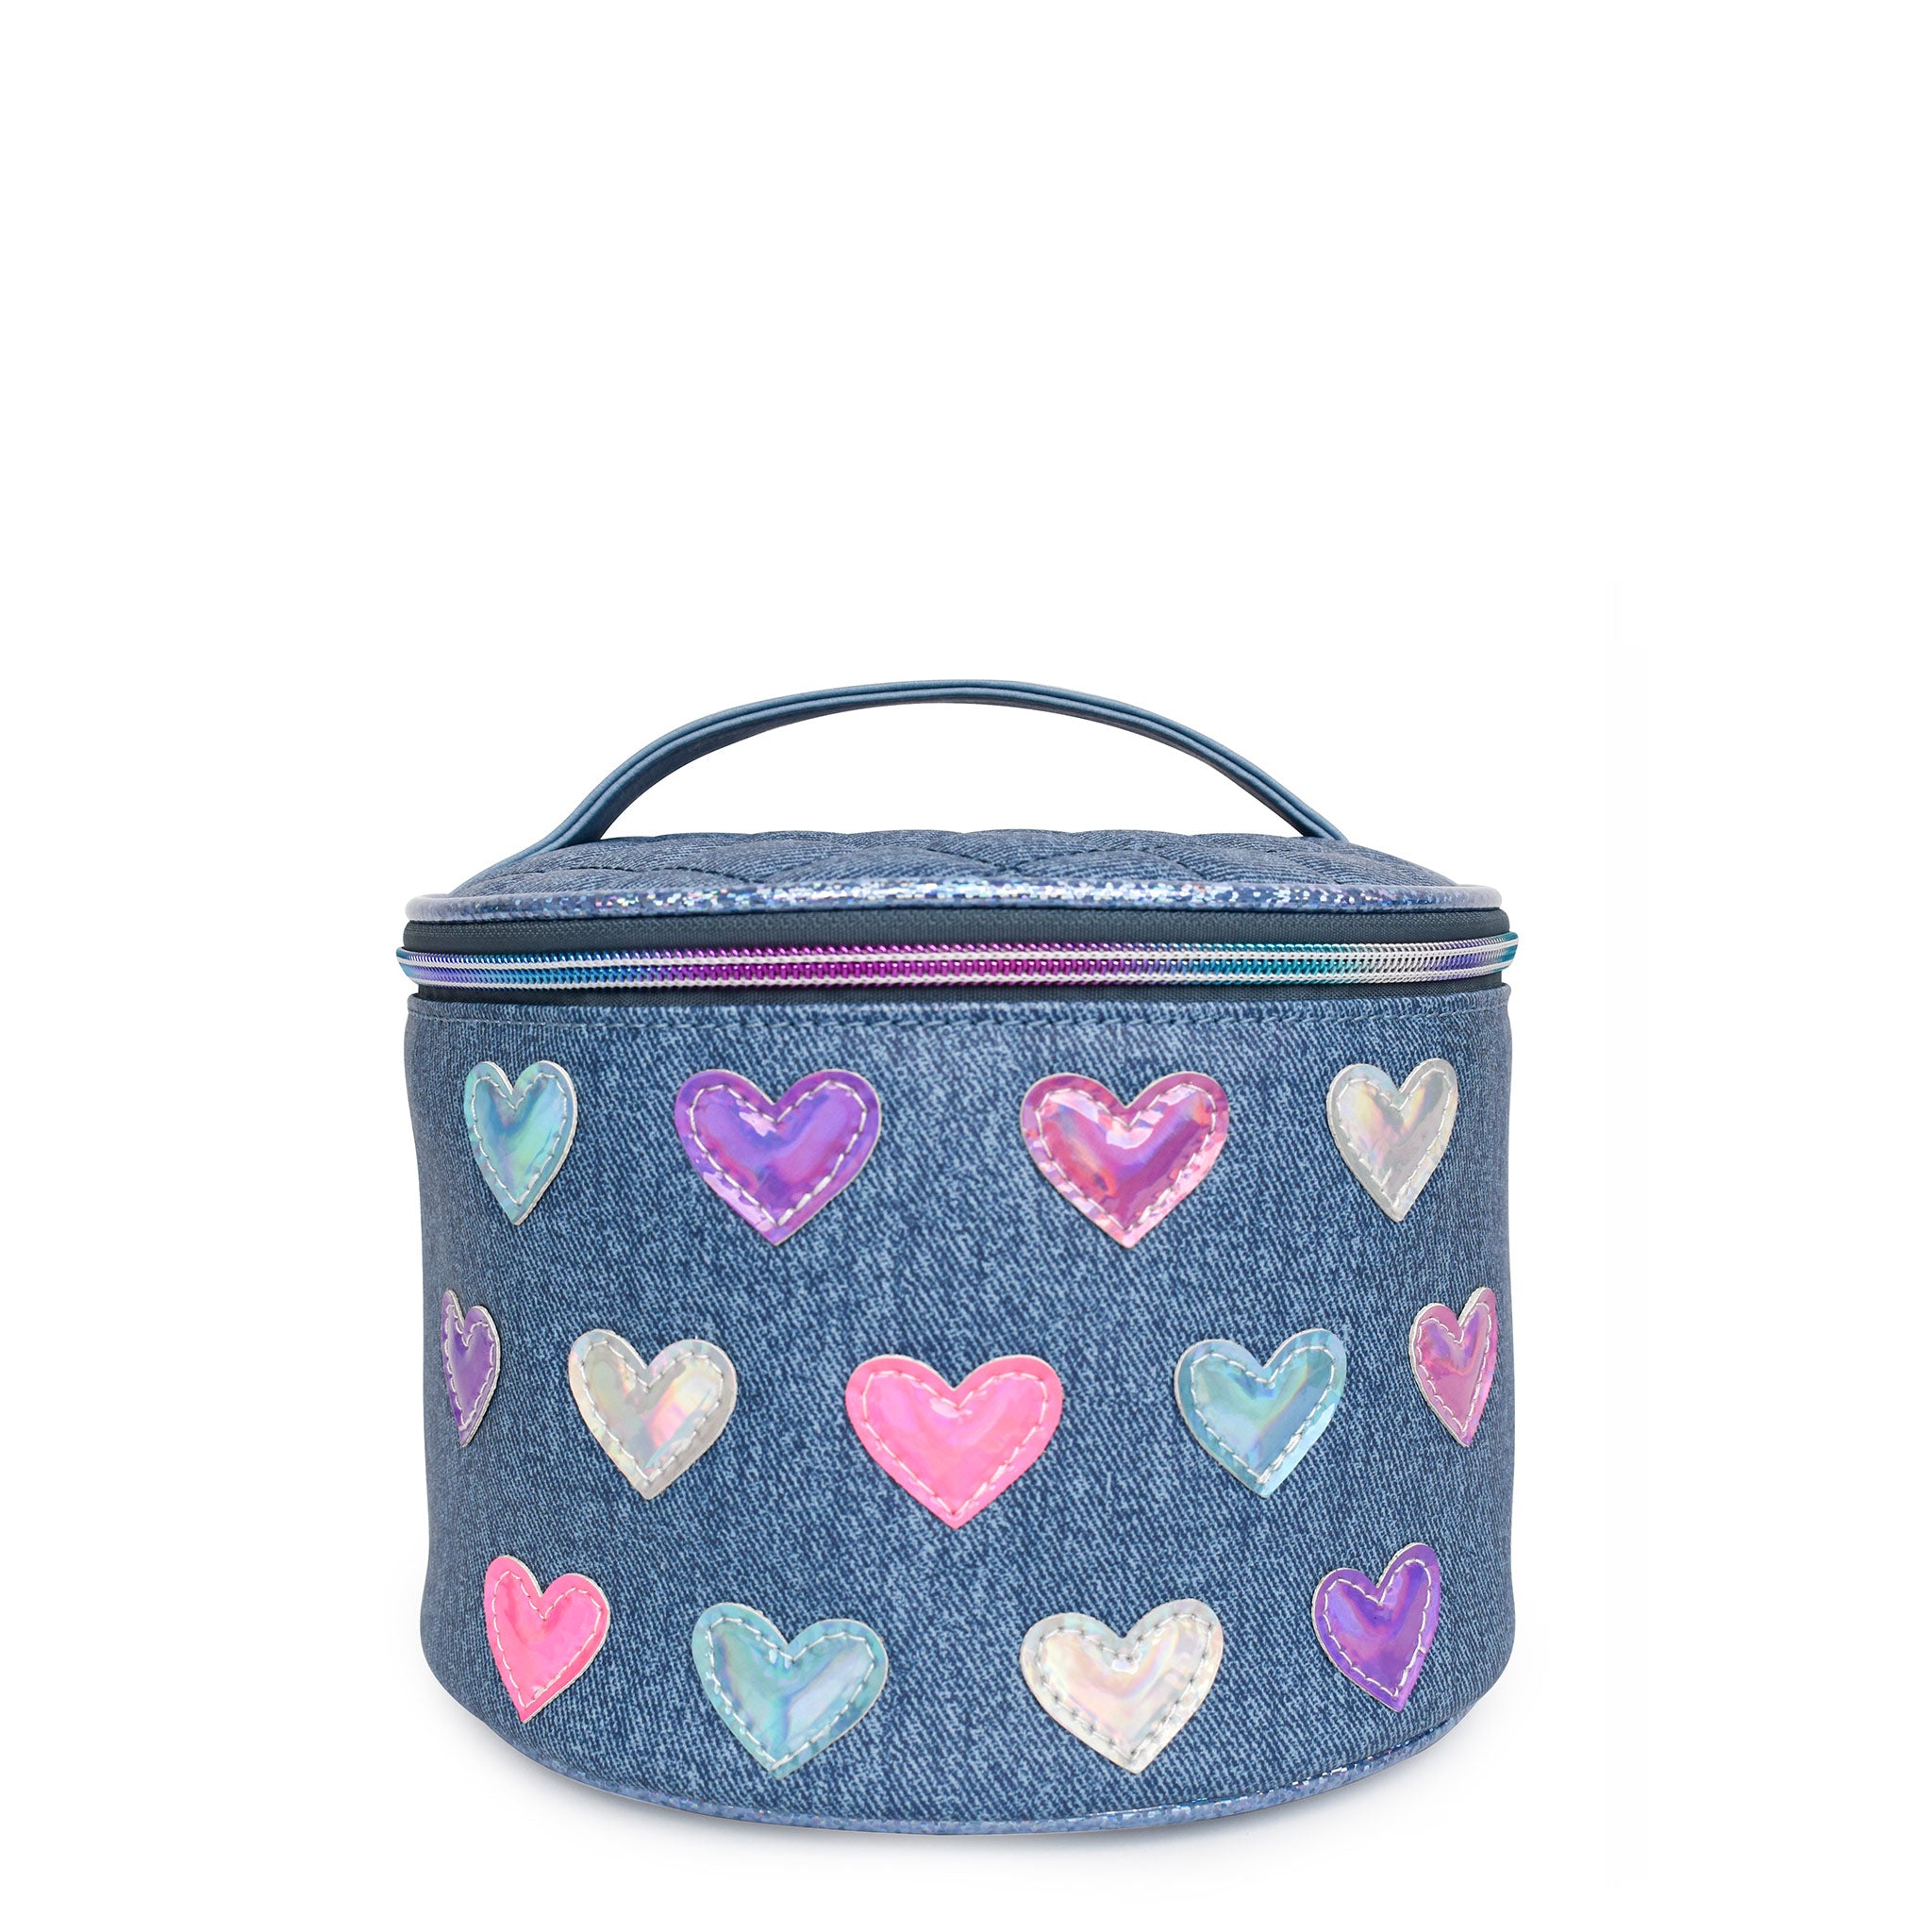 Front view of a denim round train case covered in metallic heart patches